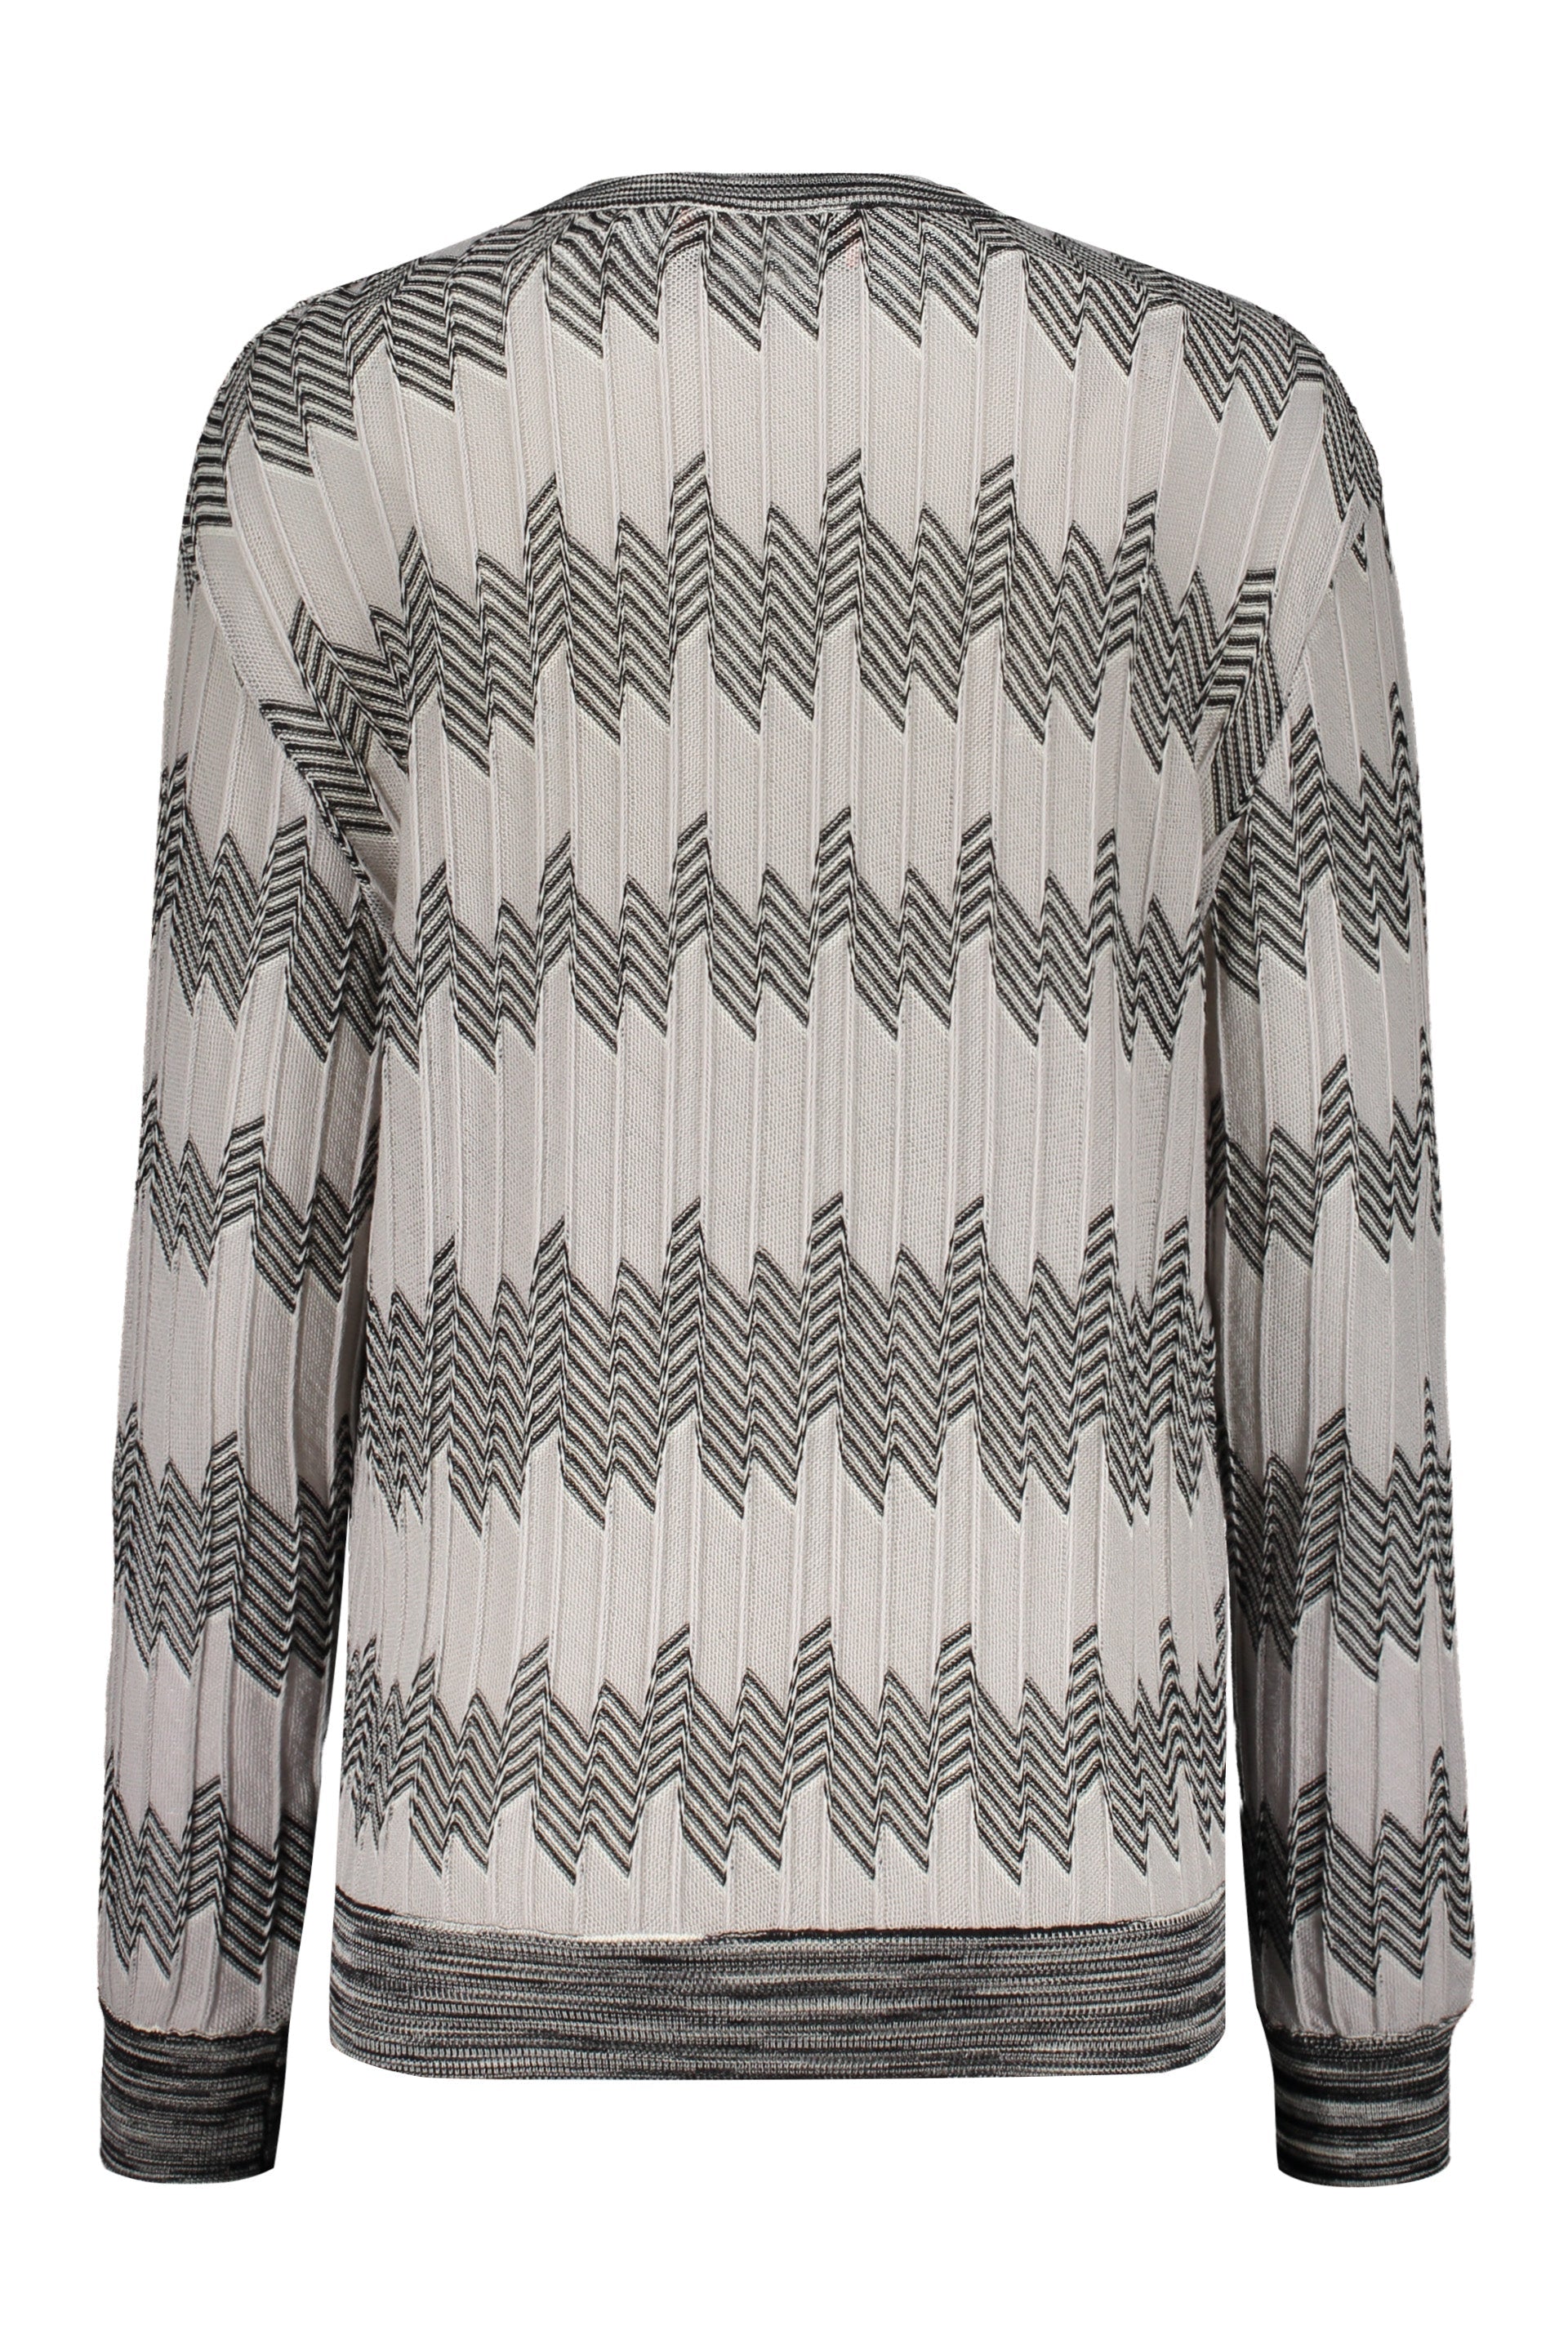 Missoni-OUTLET-SALE-Crew-neck-wool-sweater-Strick-40-ARCHIVE-COLLECTION-2.jpg